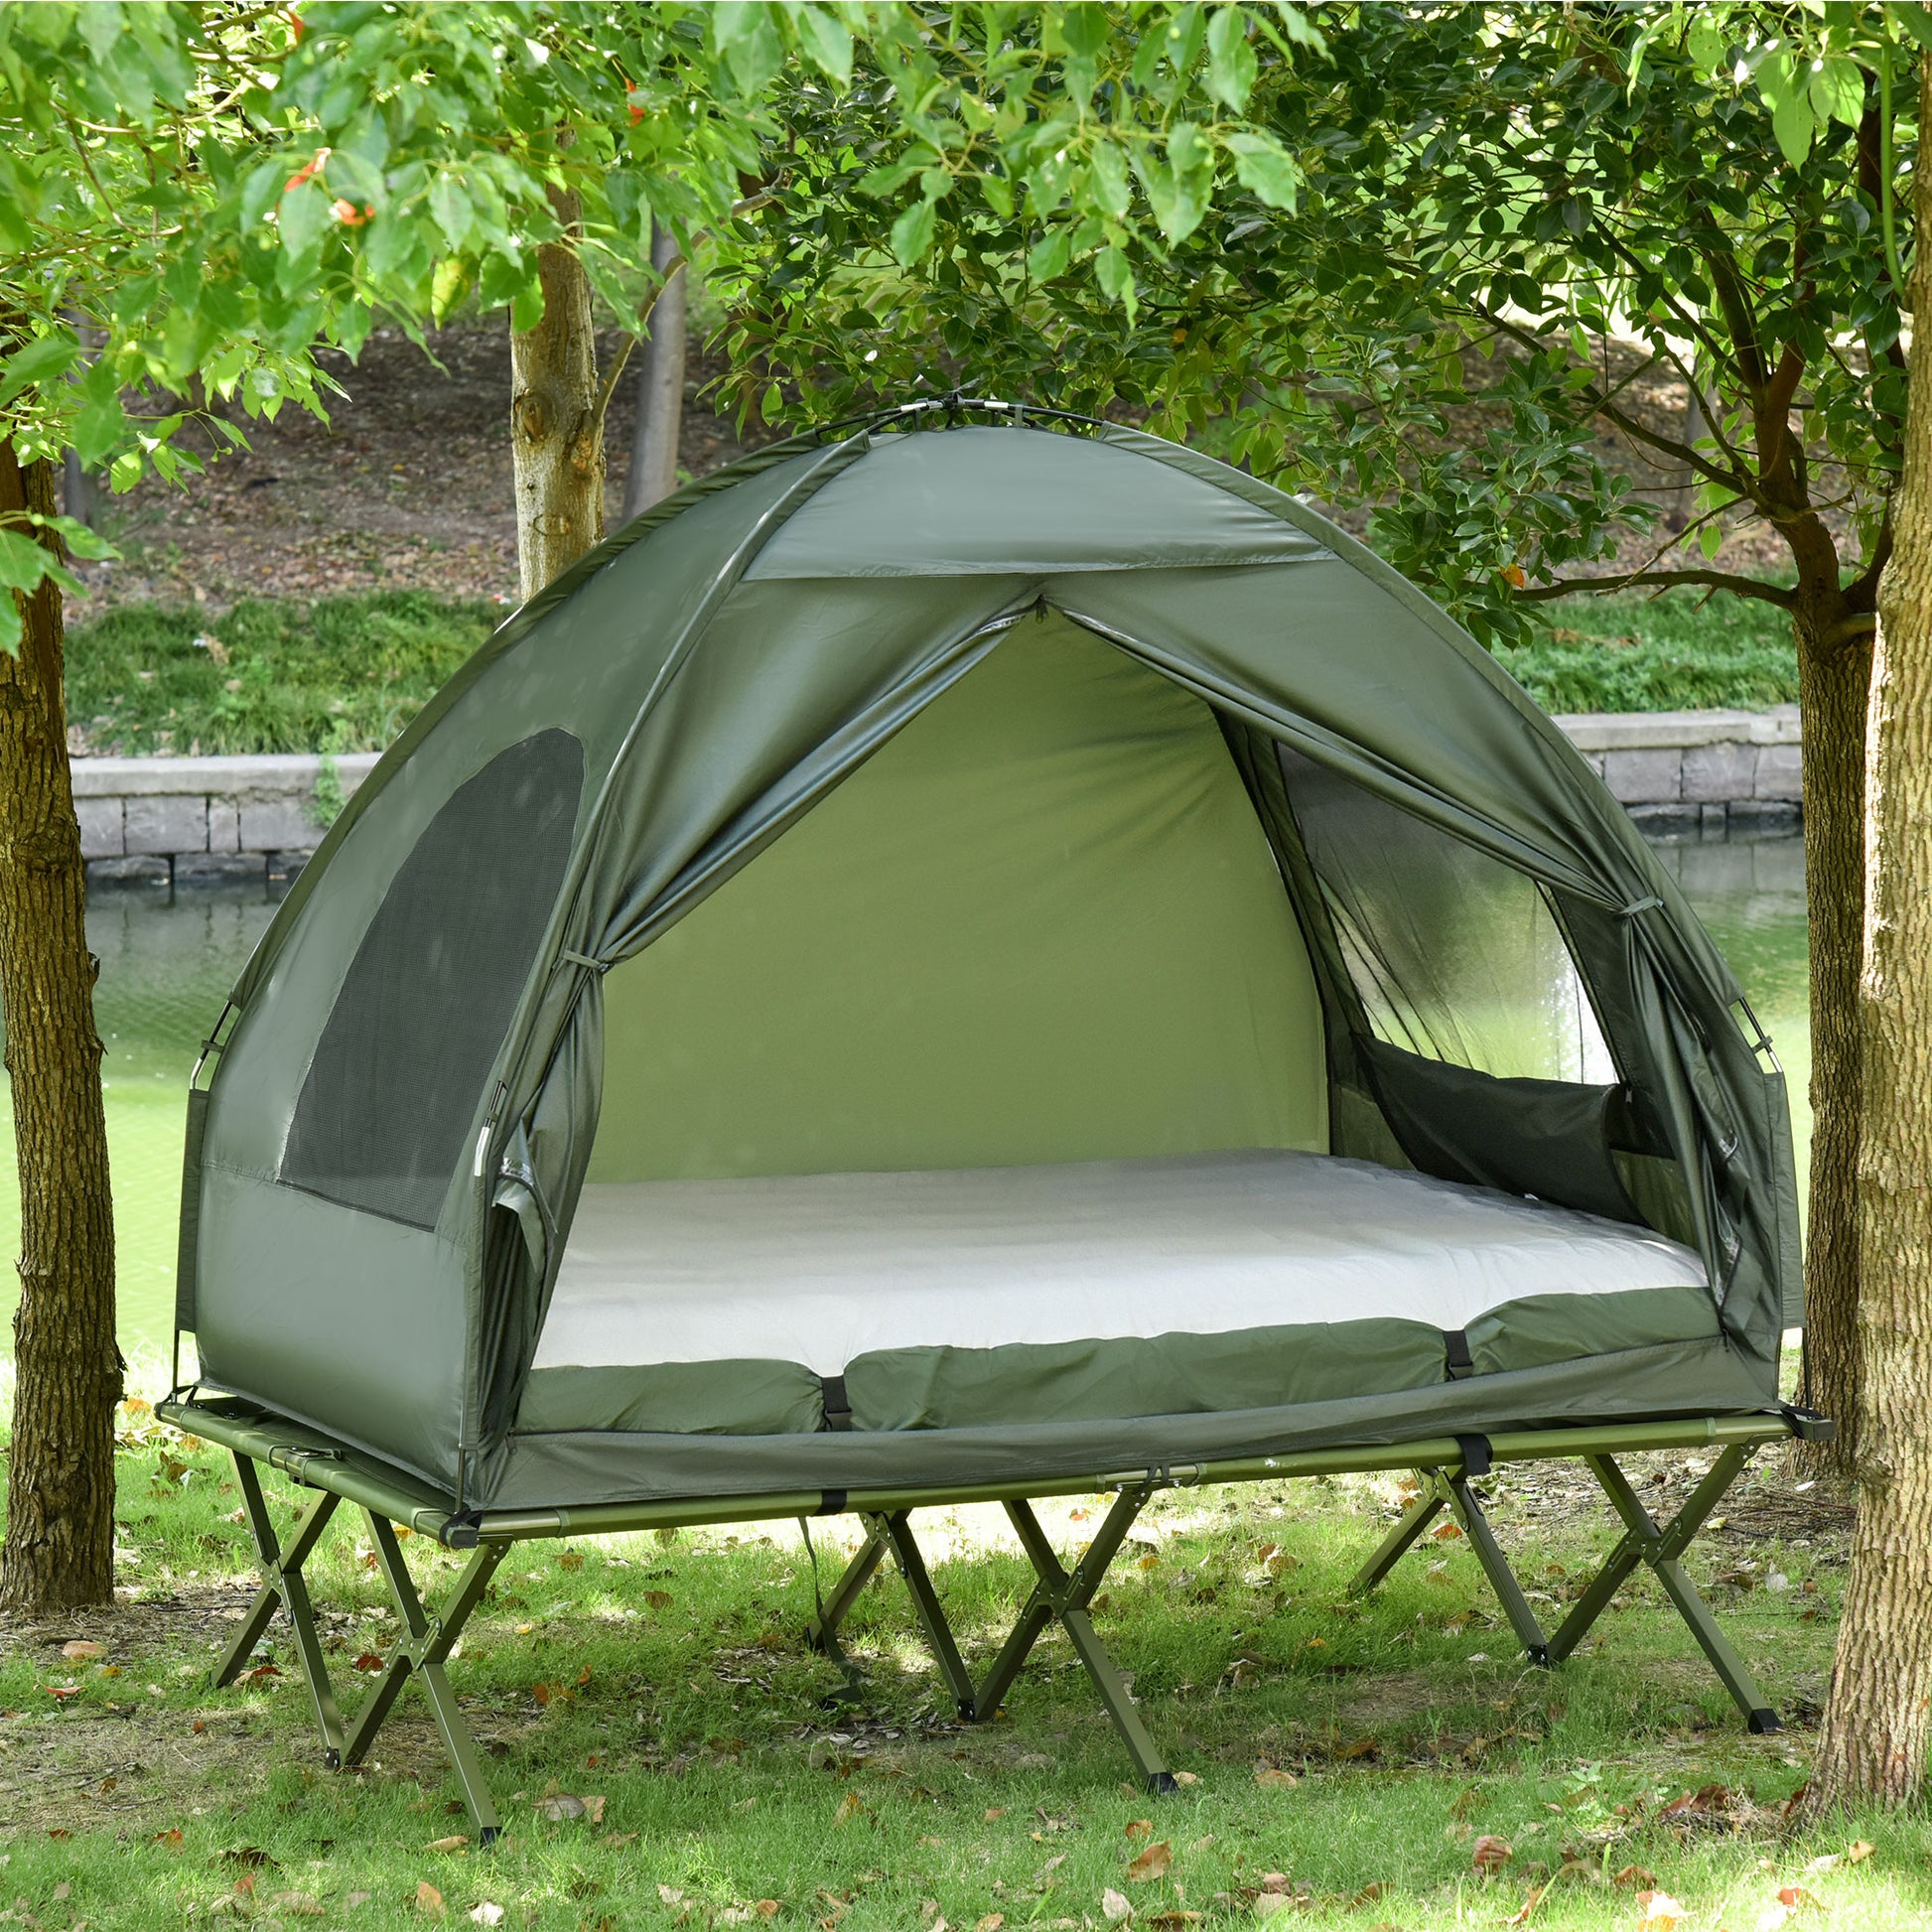 All in 1 Camping Combo Portable Folding Camping Tent Cot Air Mattress w/ Carry Bag and Pump Hiking Shelter Sleeping Bed Dark Green at Gallery Canada